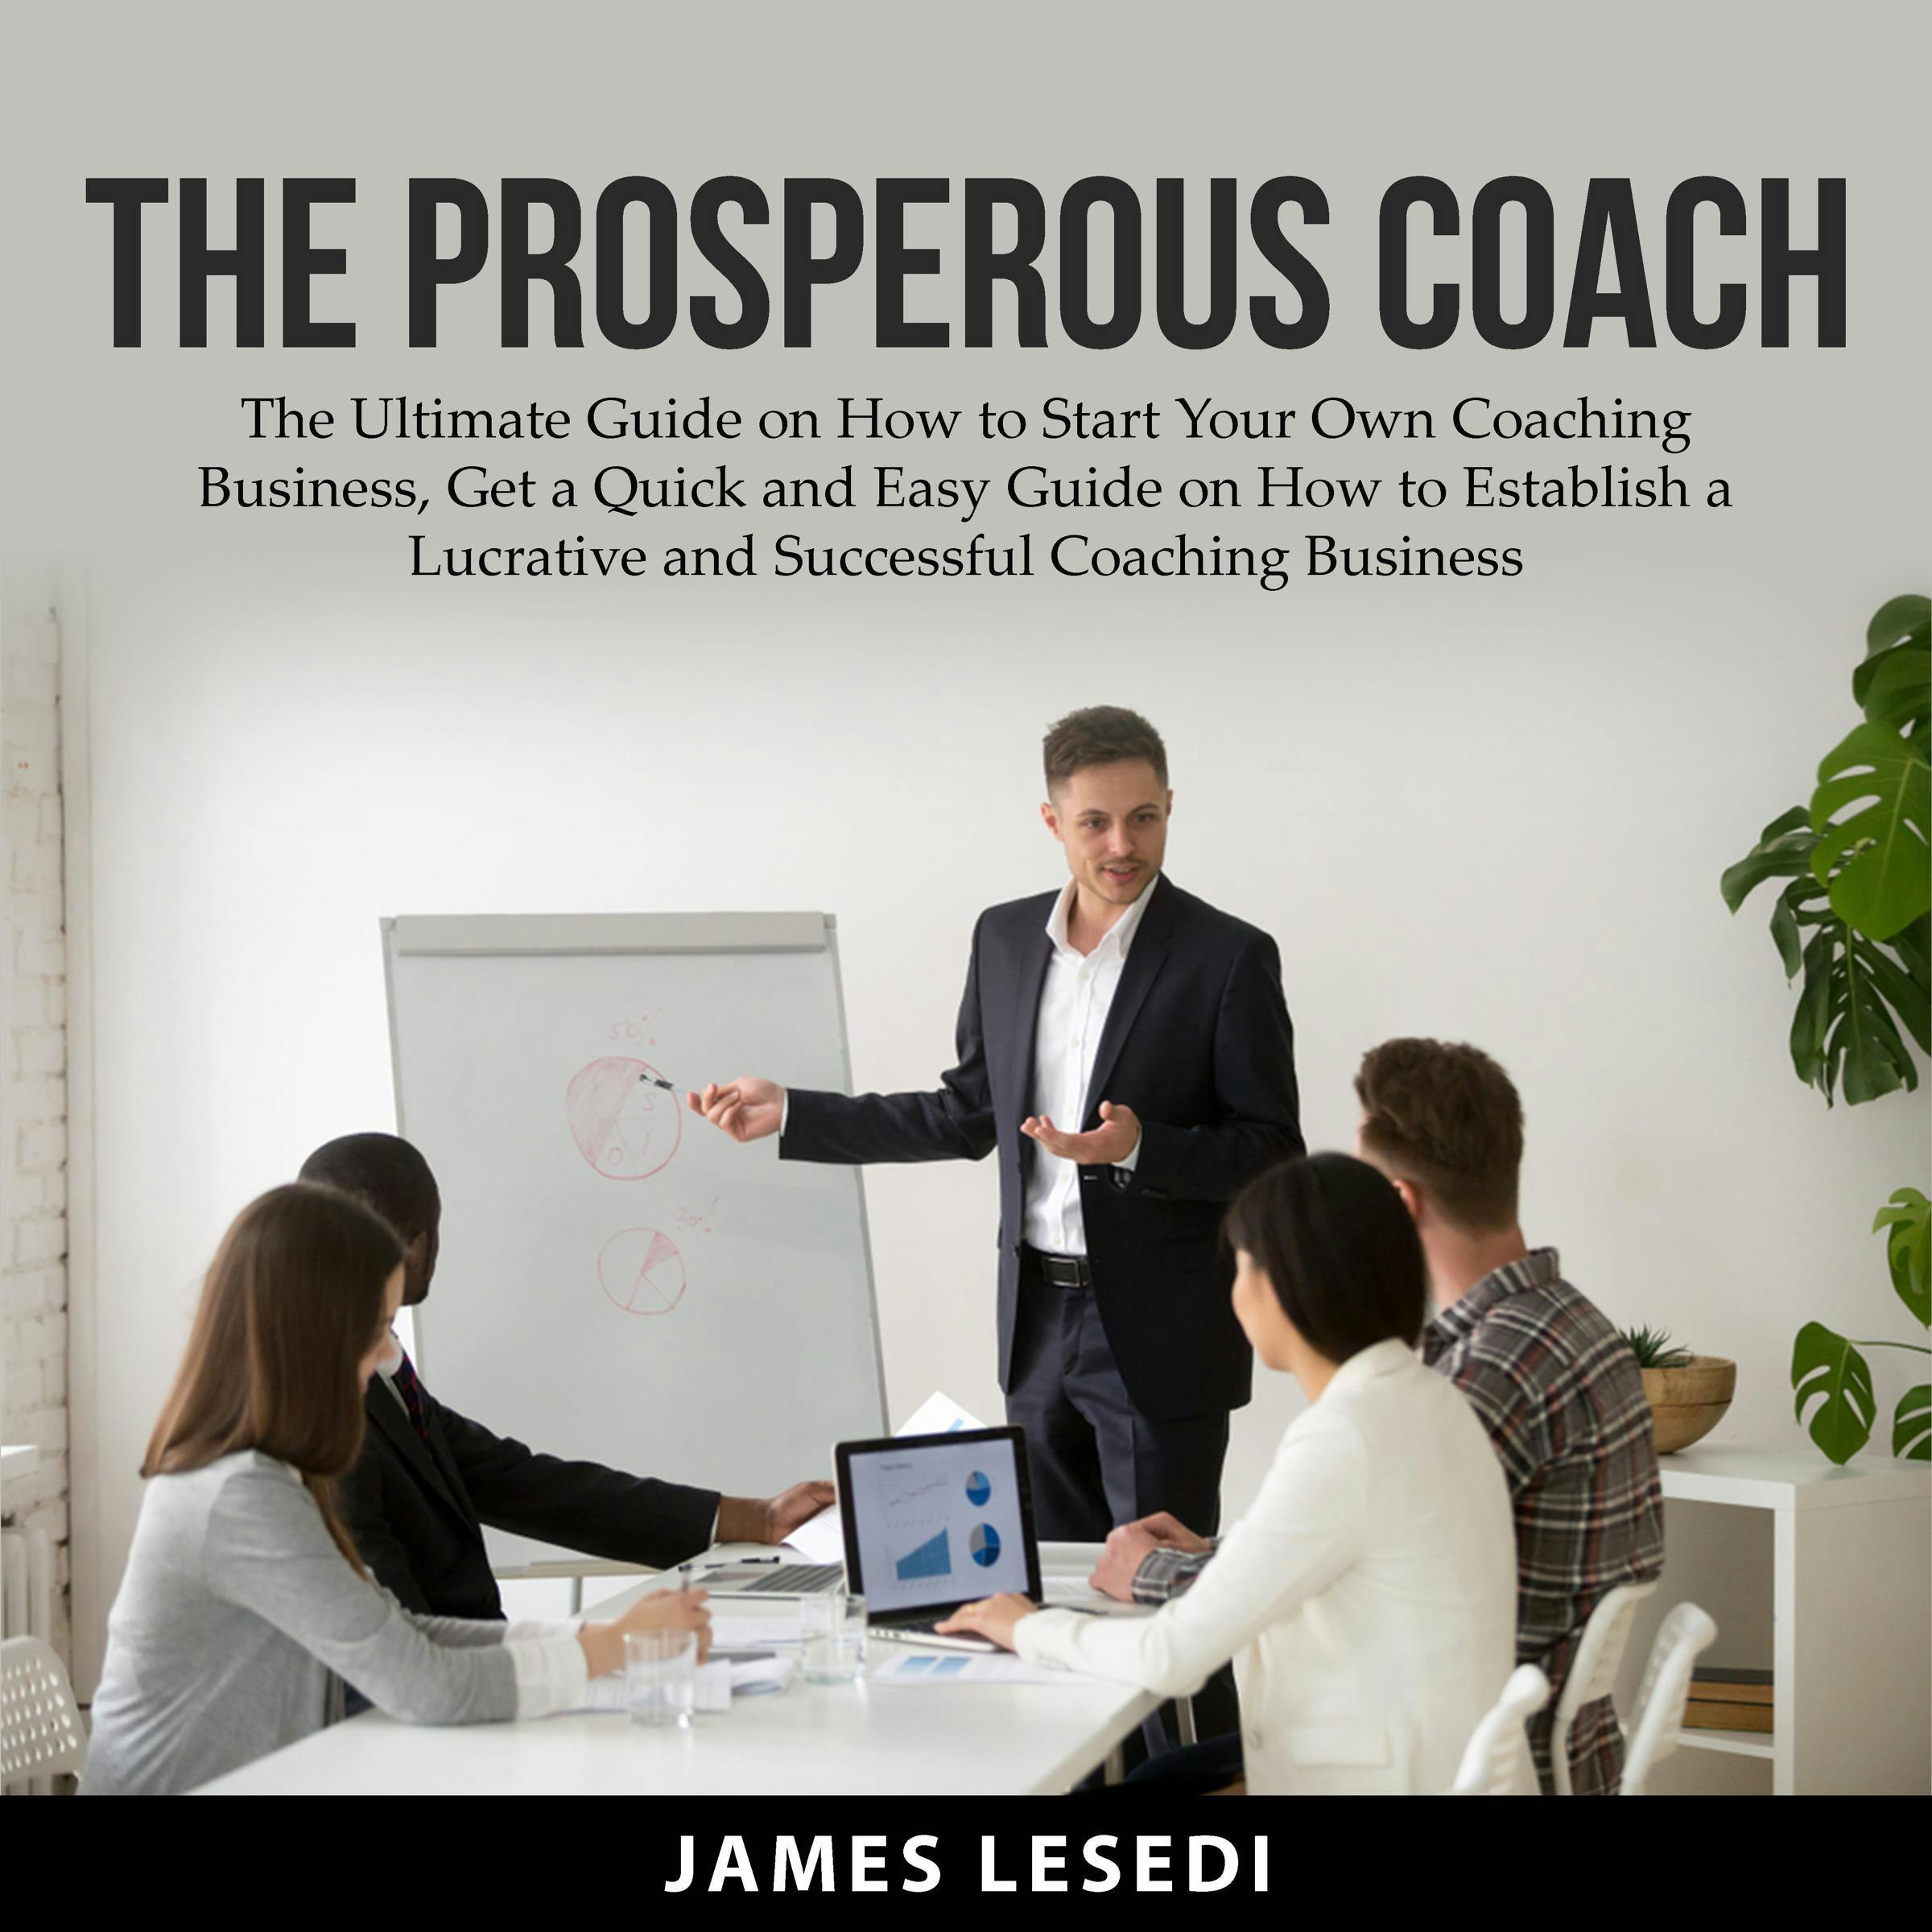 The Prosperous Coach: The Ultimate Guide on How to Start Your Own Coaching Business, Get a Quick and Easy Guide on How to Establish a Lucrative and Successful Coaching Business - James Lesedi